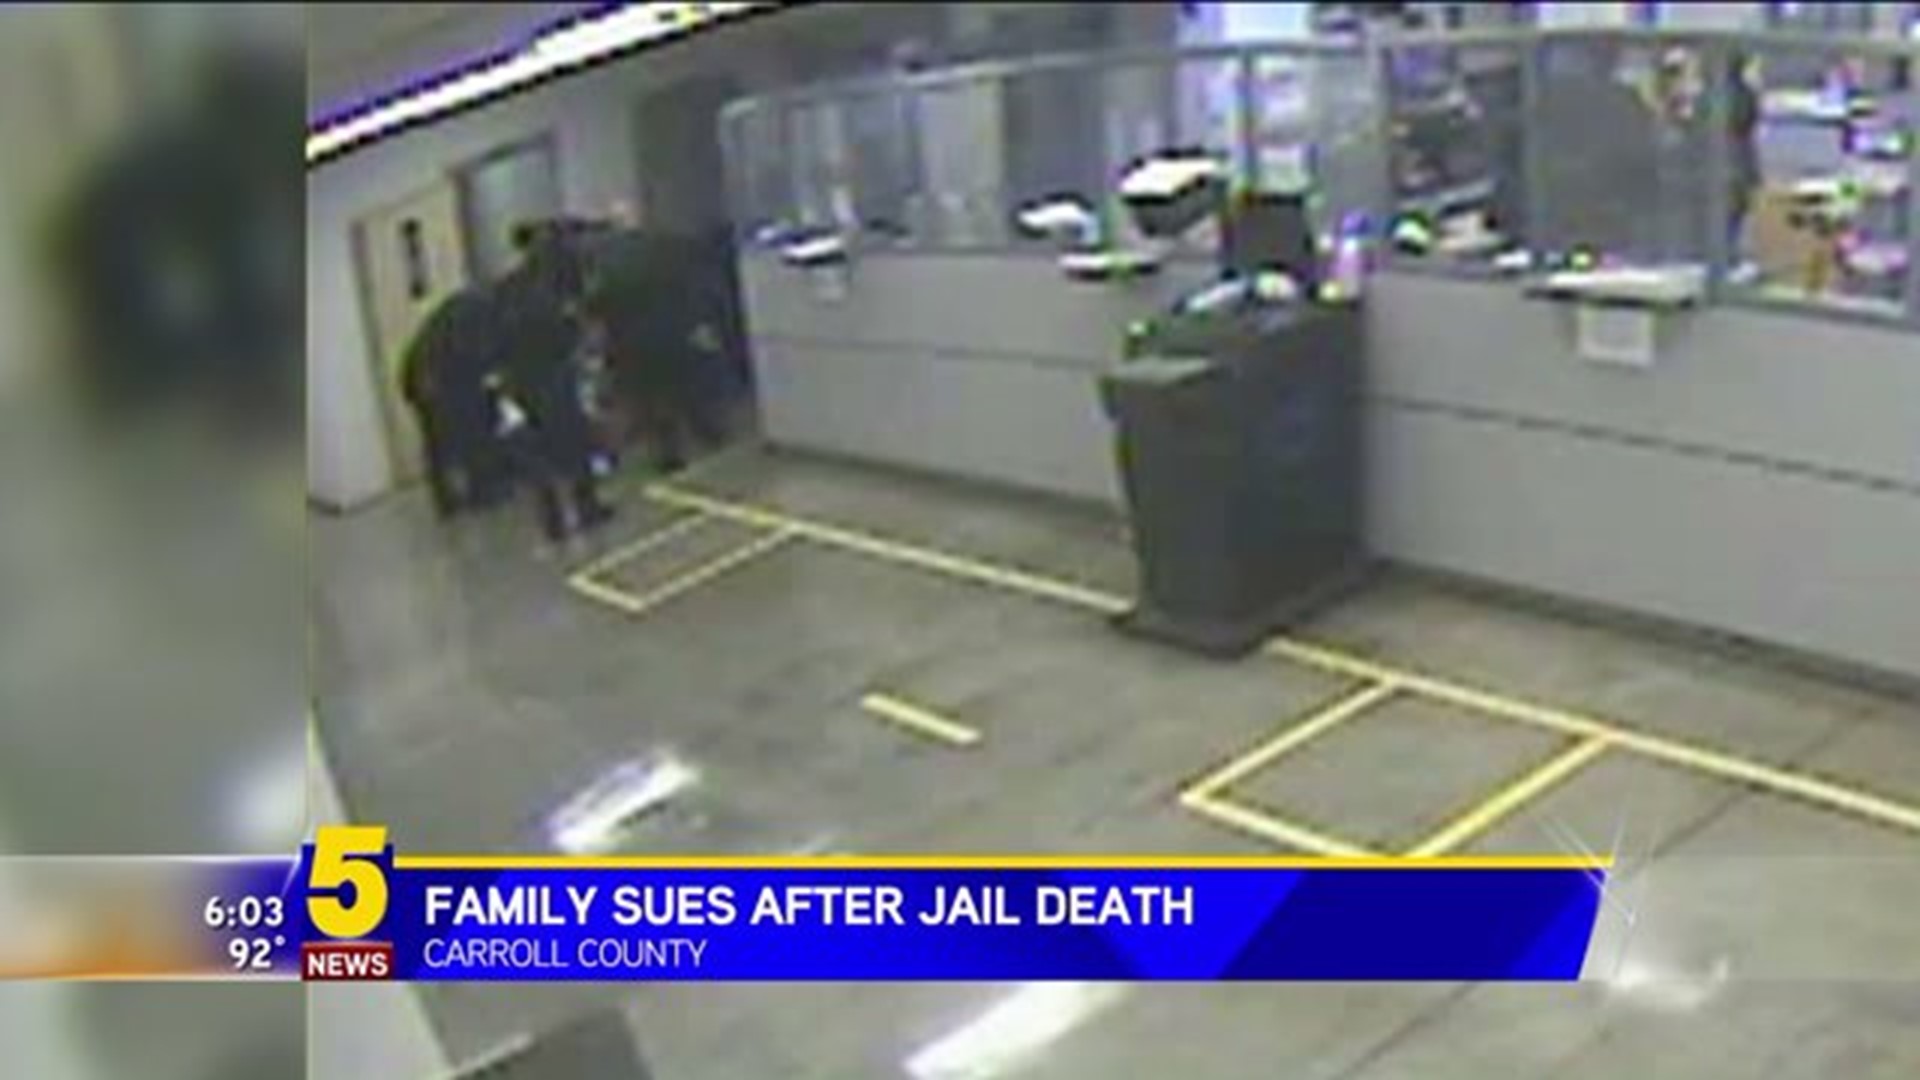 Family Of Carroll County Inmate Speaks About Wrongful Death Lawsuit